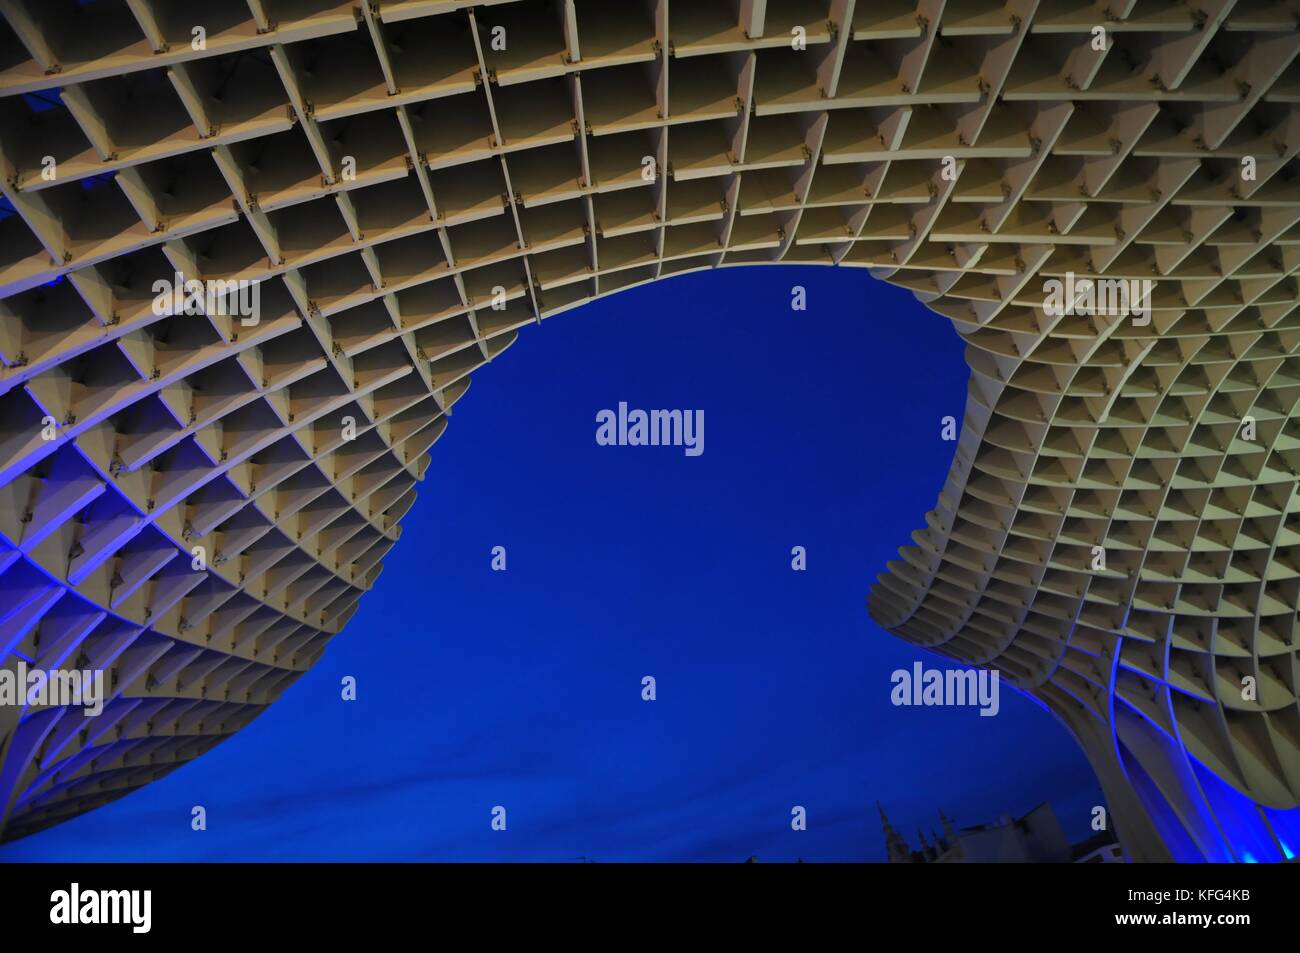 Metropol Parasol, in Seville, Spain. Abstract of Giant wooden structure at dusk creating blue background image of your imagination. Stock Photo